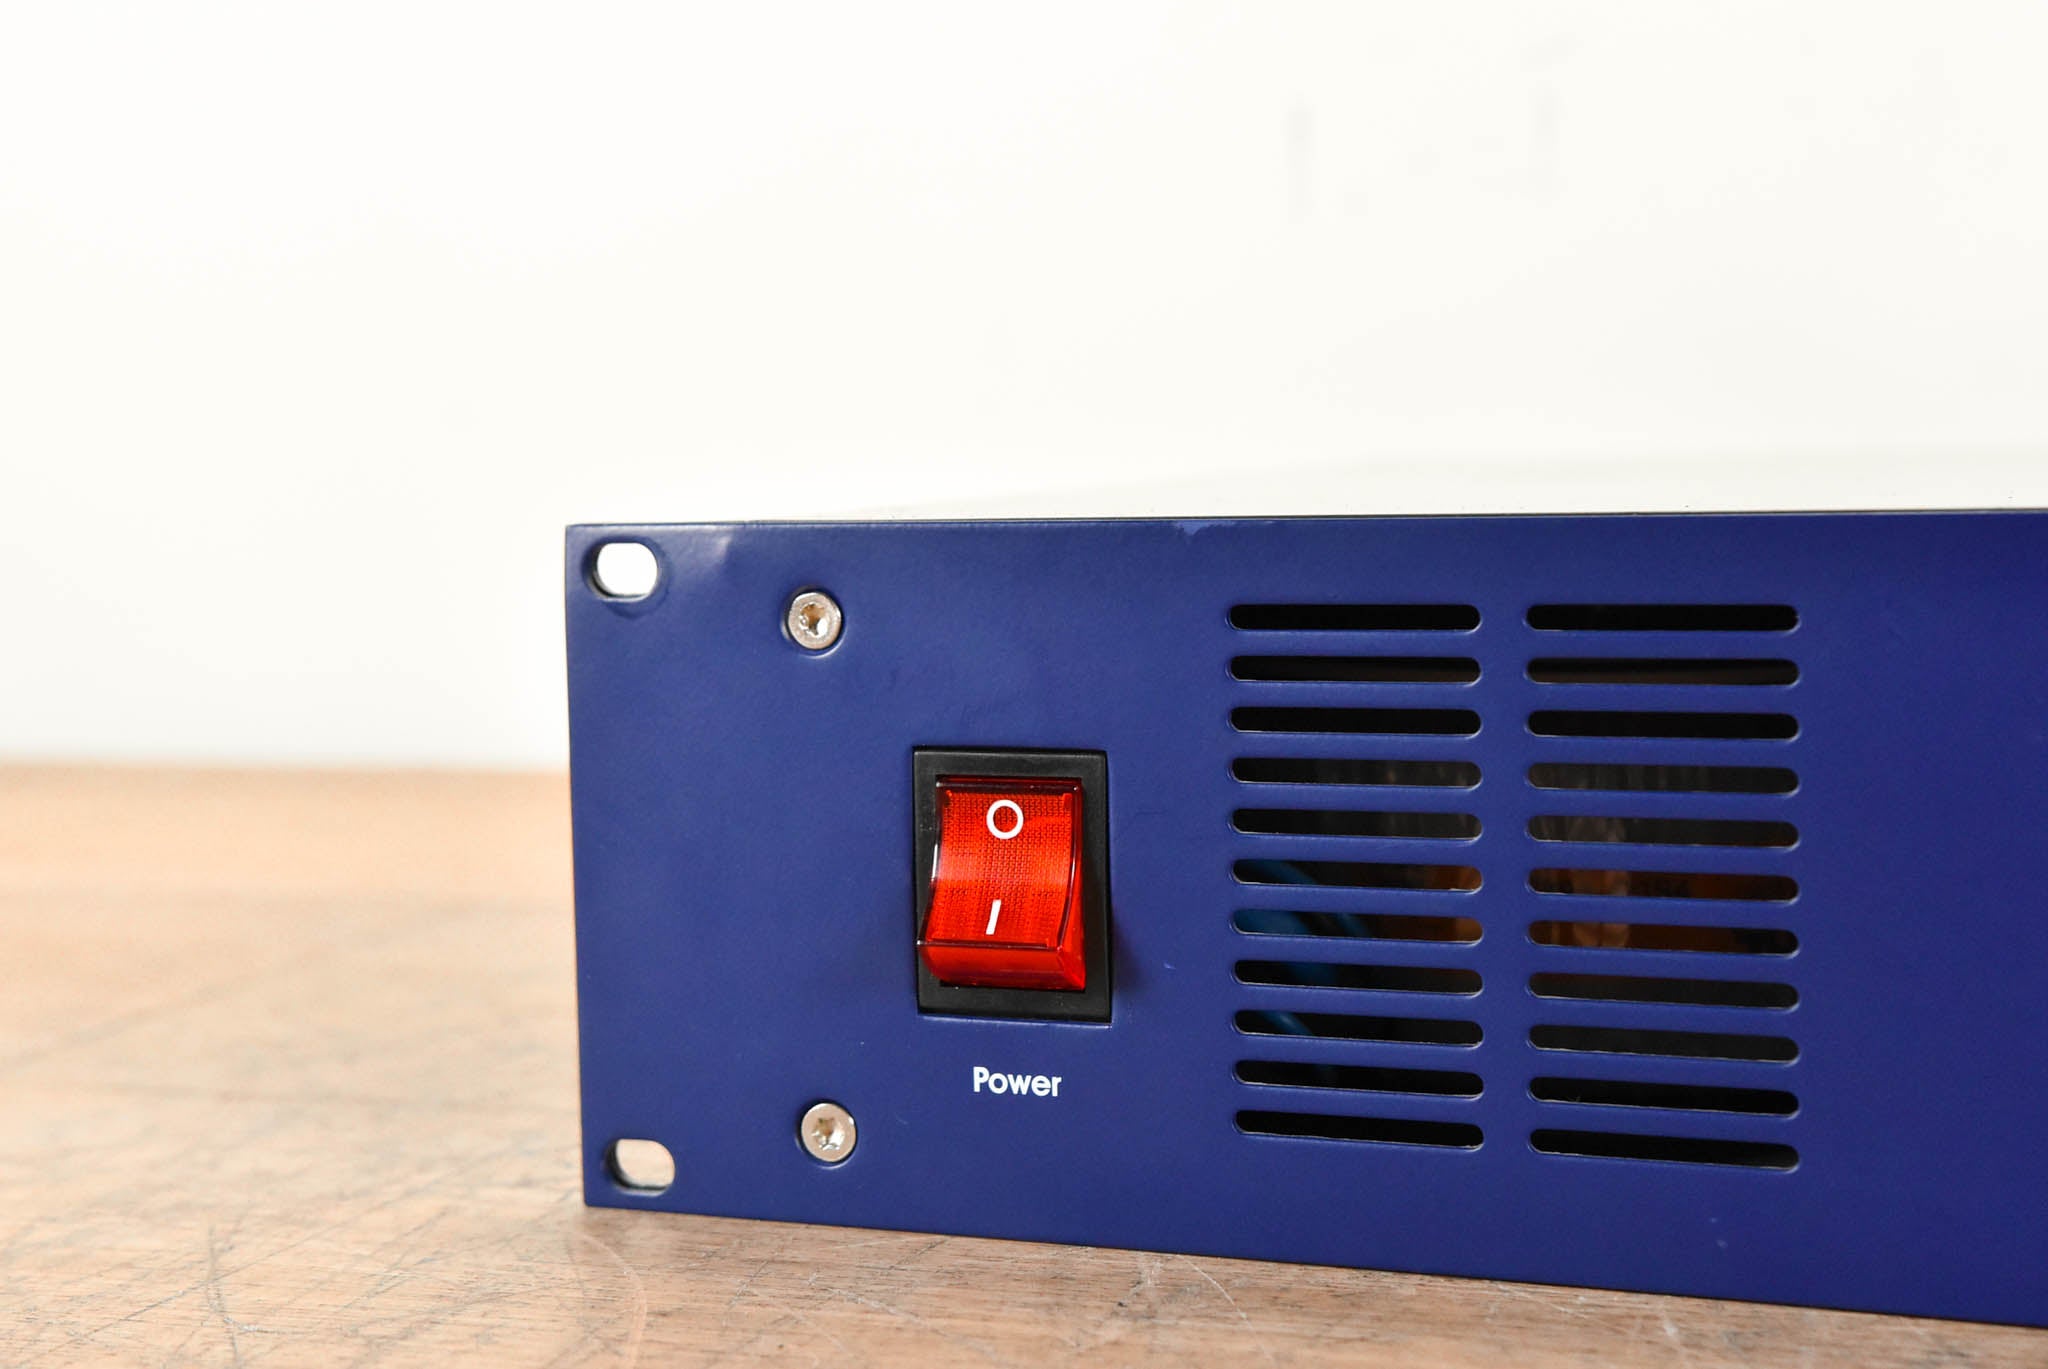 Midas V190 External Power Supply Unit for VENICE and SIENA Consoles